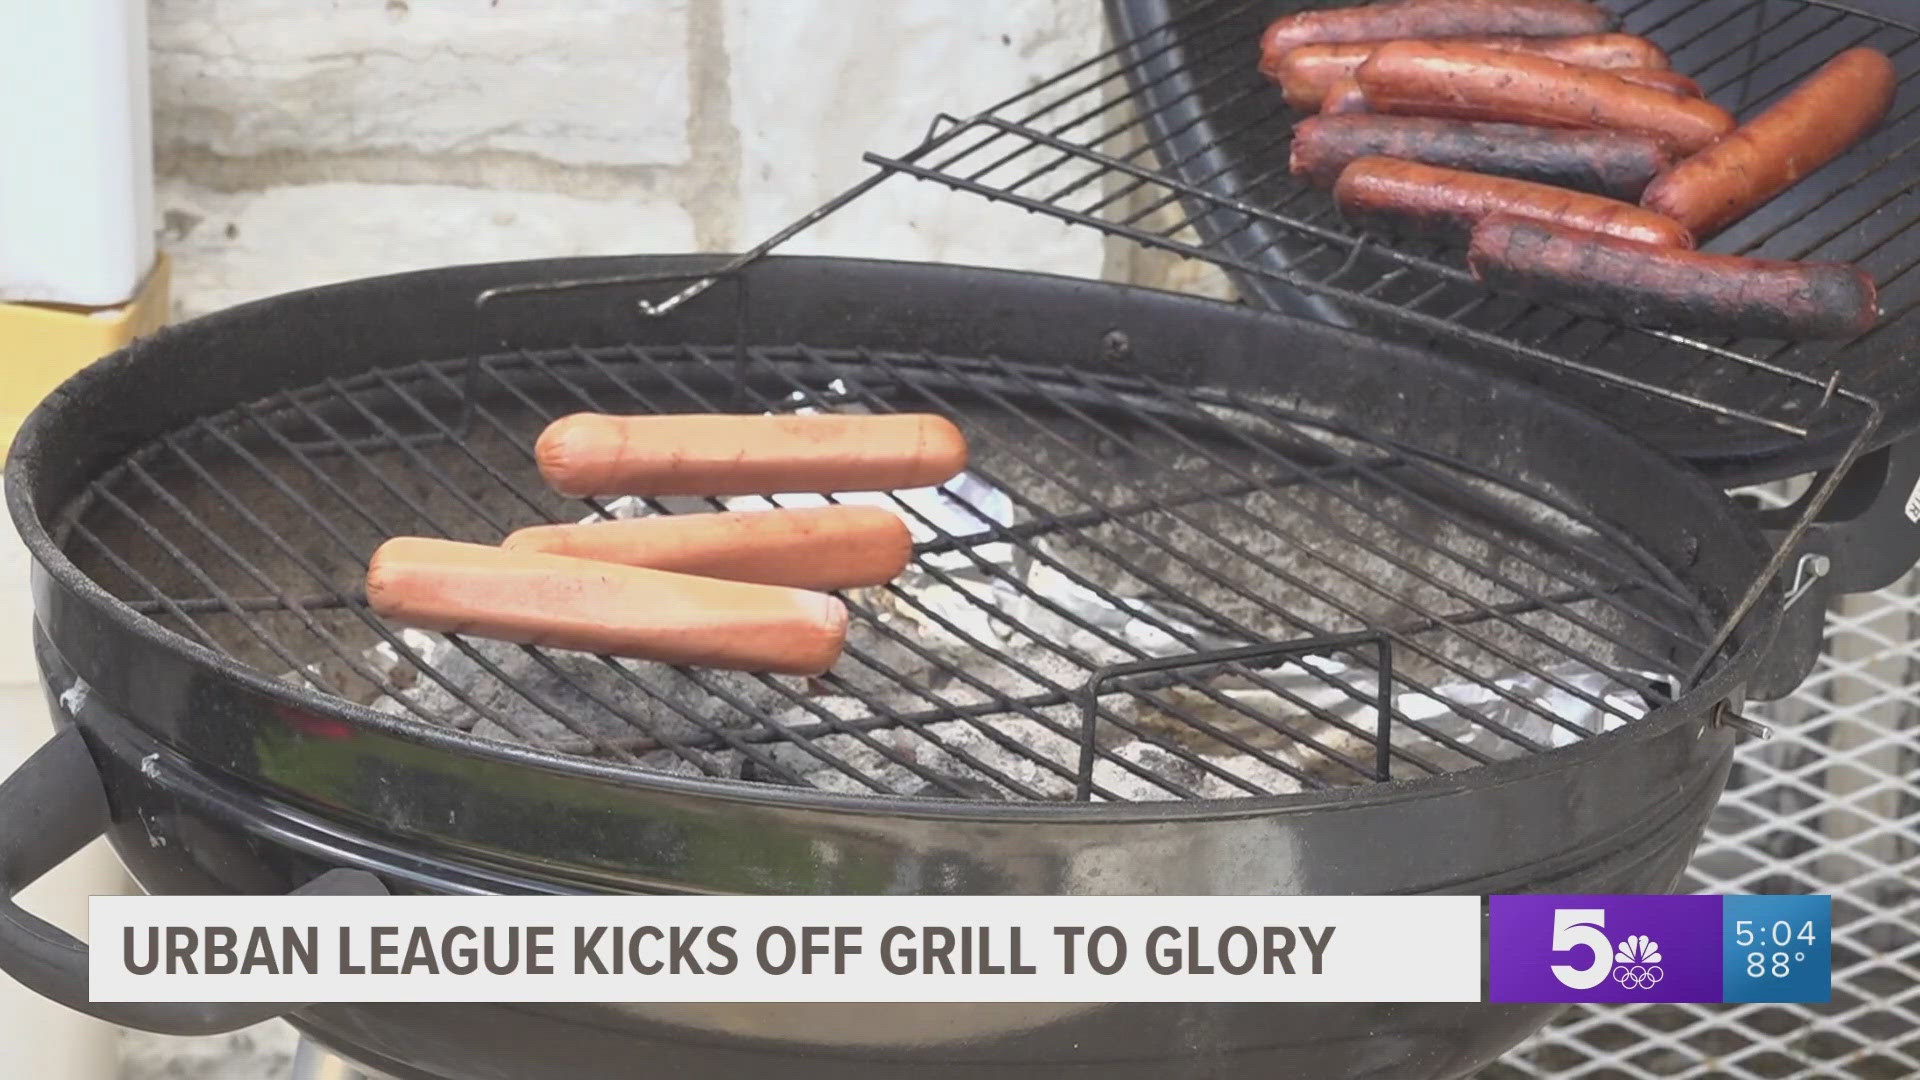 More than 250 churches in the St. Louis area participate in the program. Participating churches will grill every Saturday over the summer from 11 a.m. to 1 p.m.